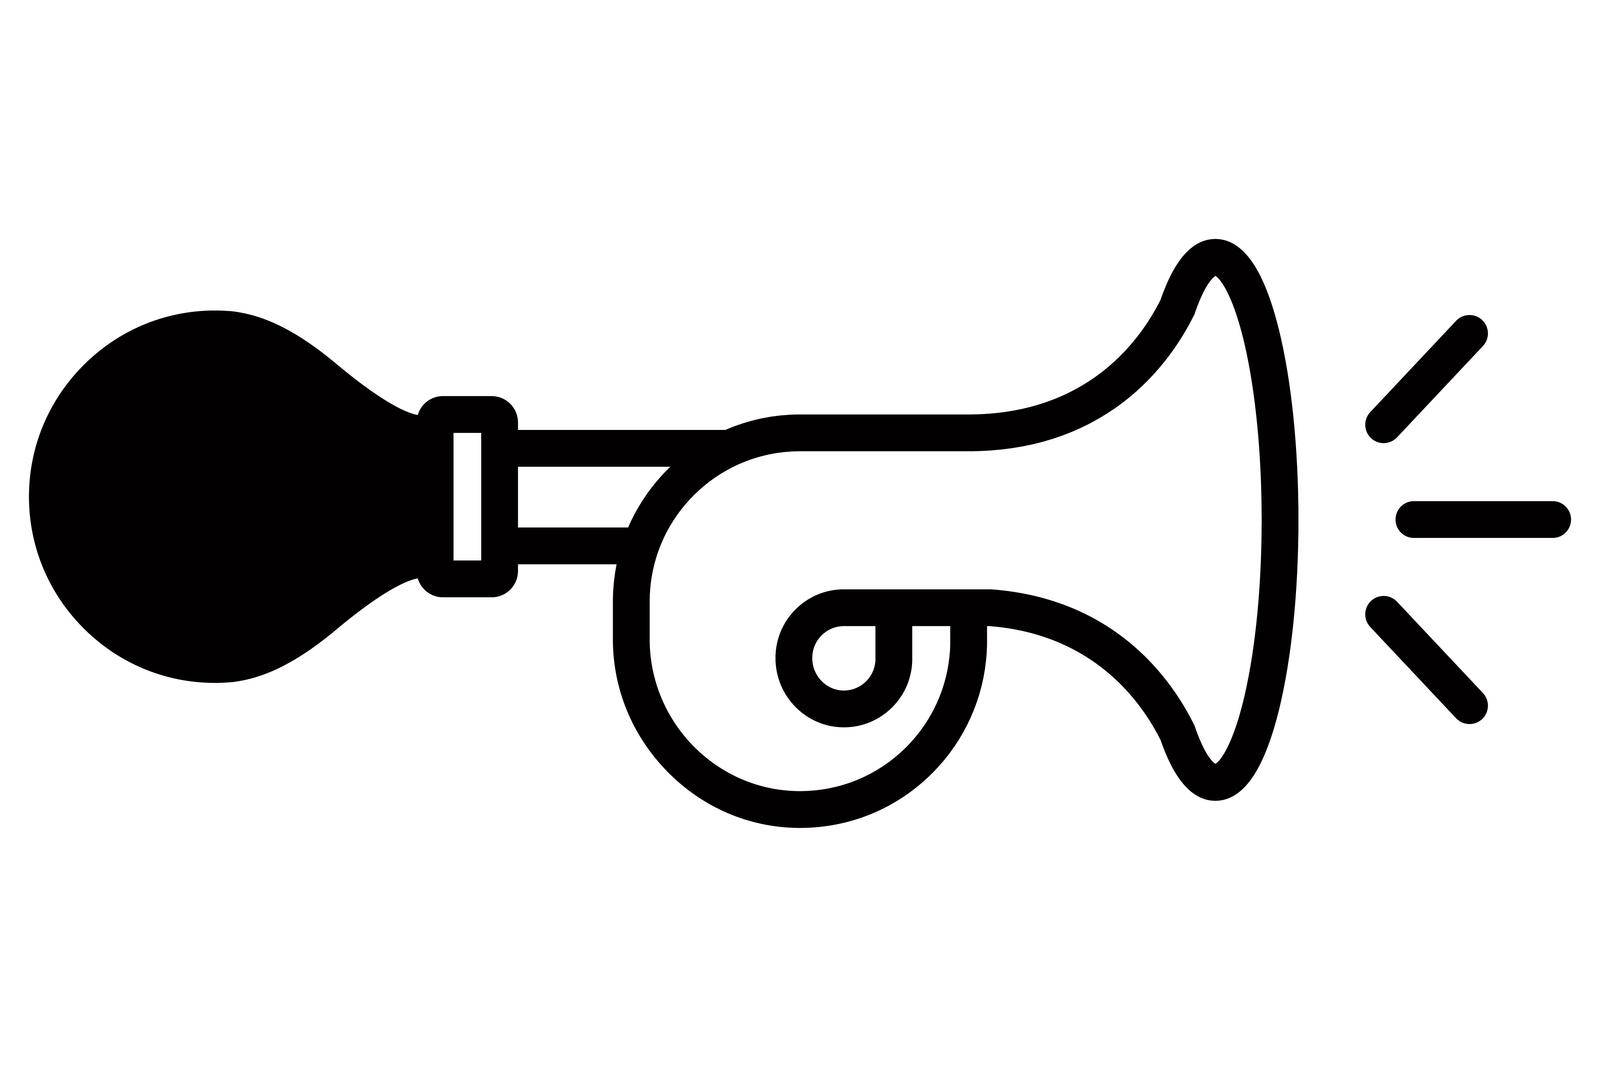 black icon of a horn to signal a car. musical instrument. flat vector illustration.